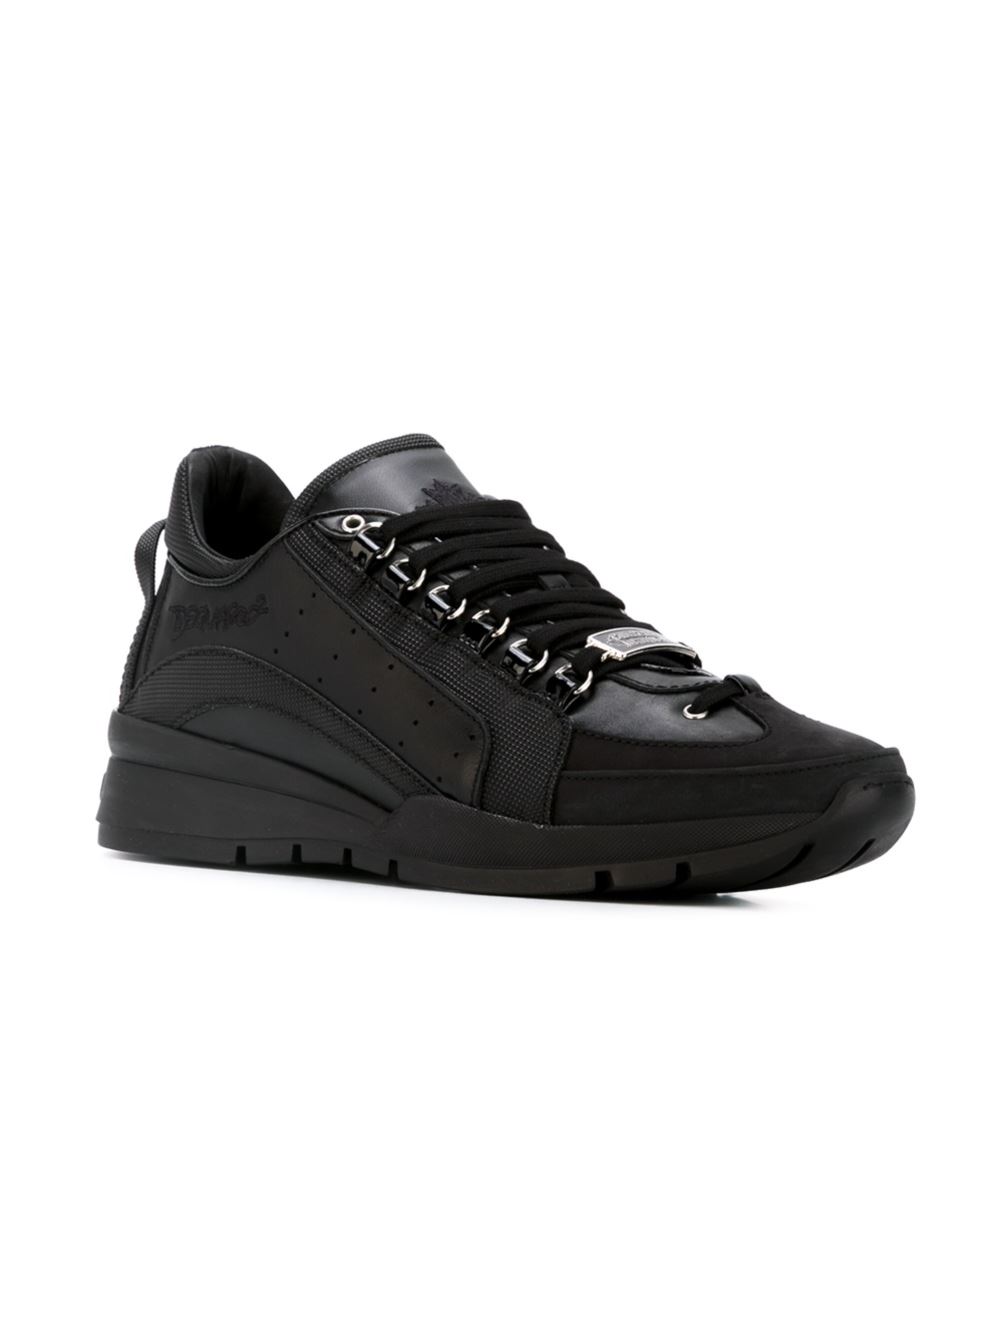 chaussure dsquared homme prix